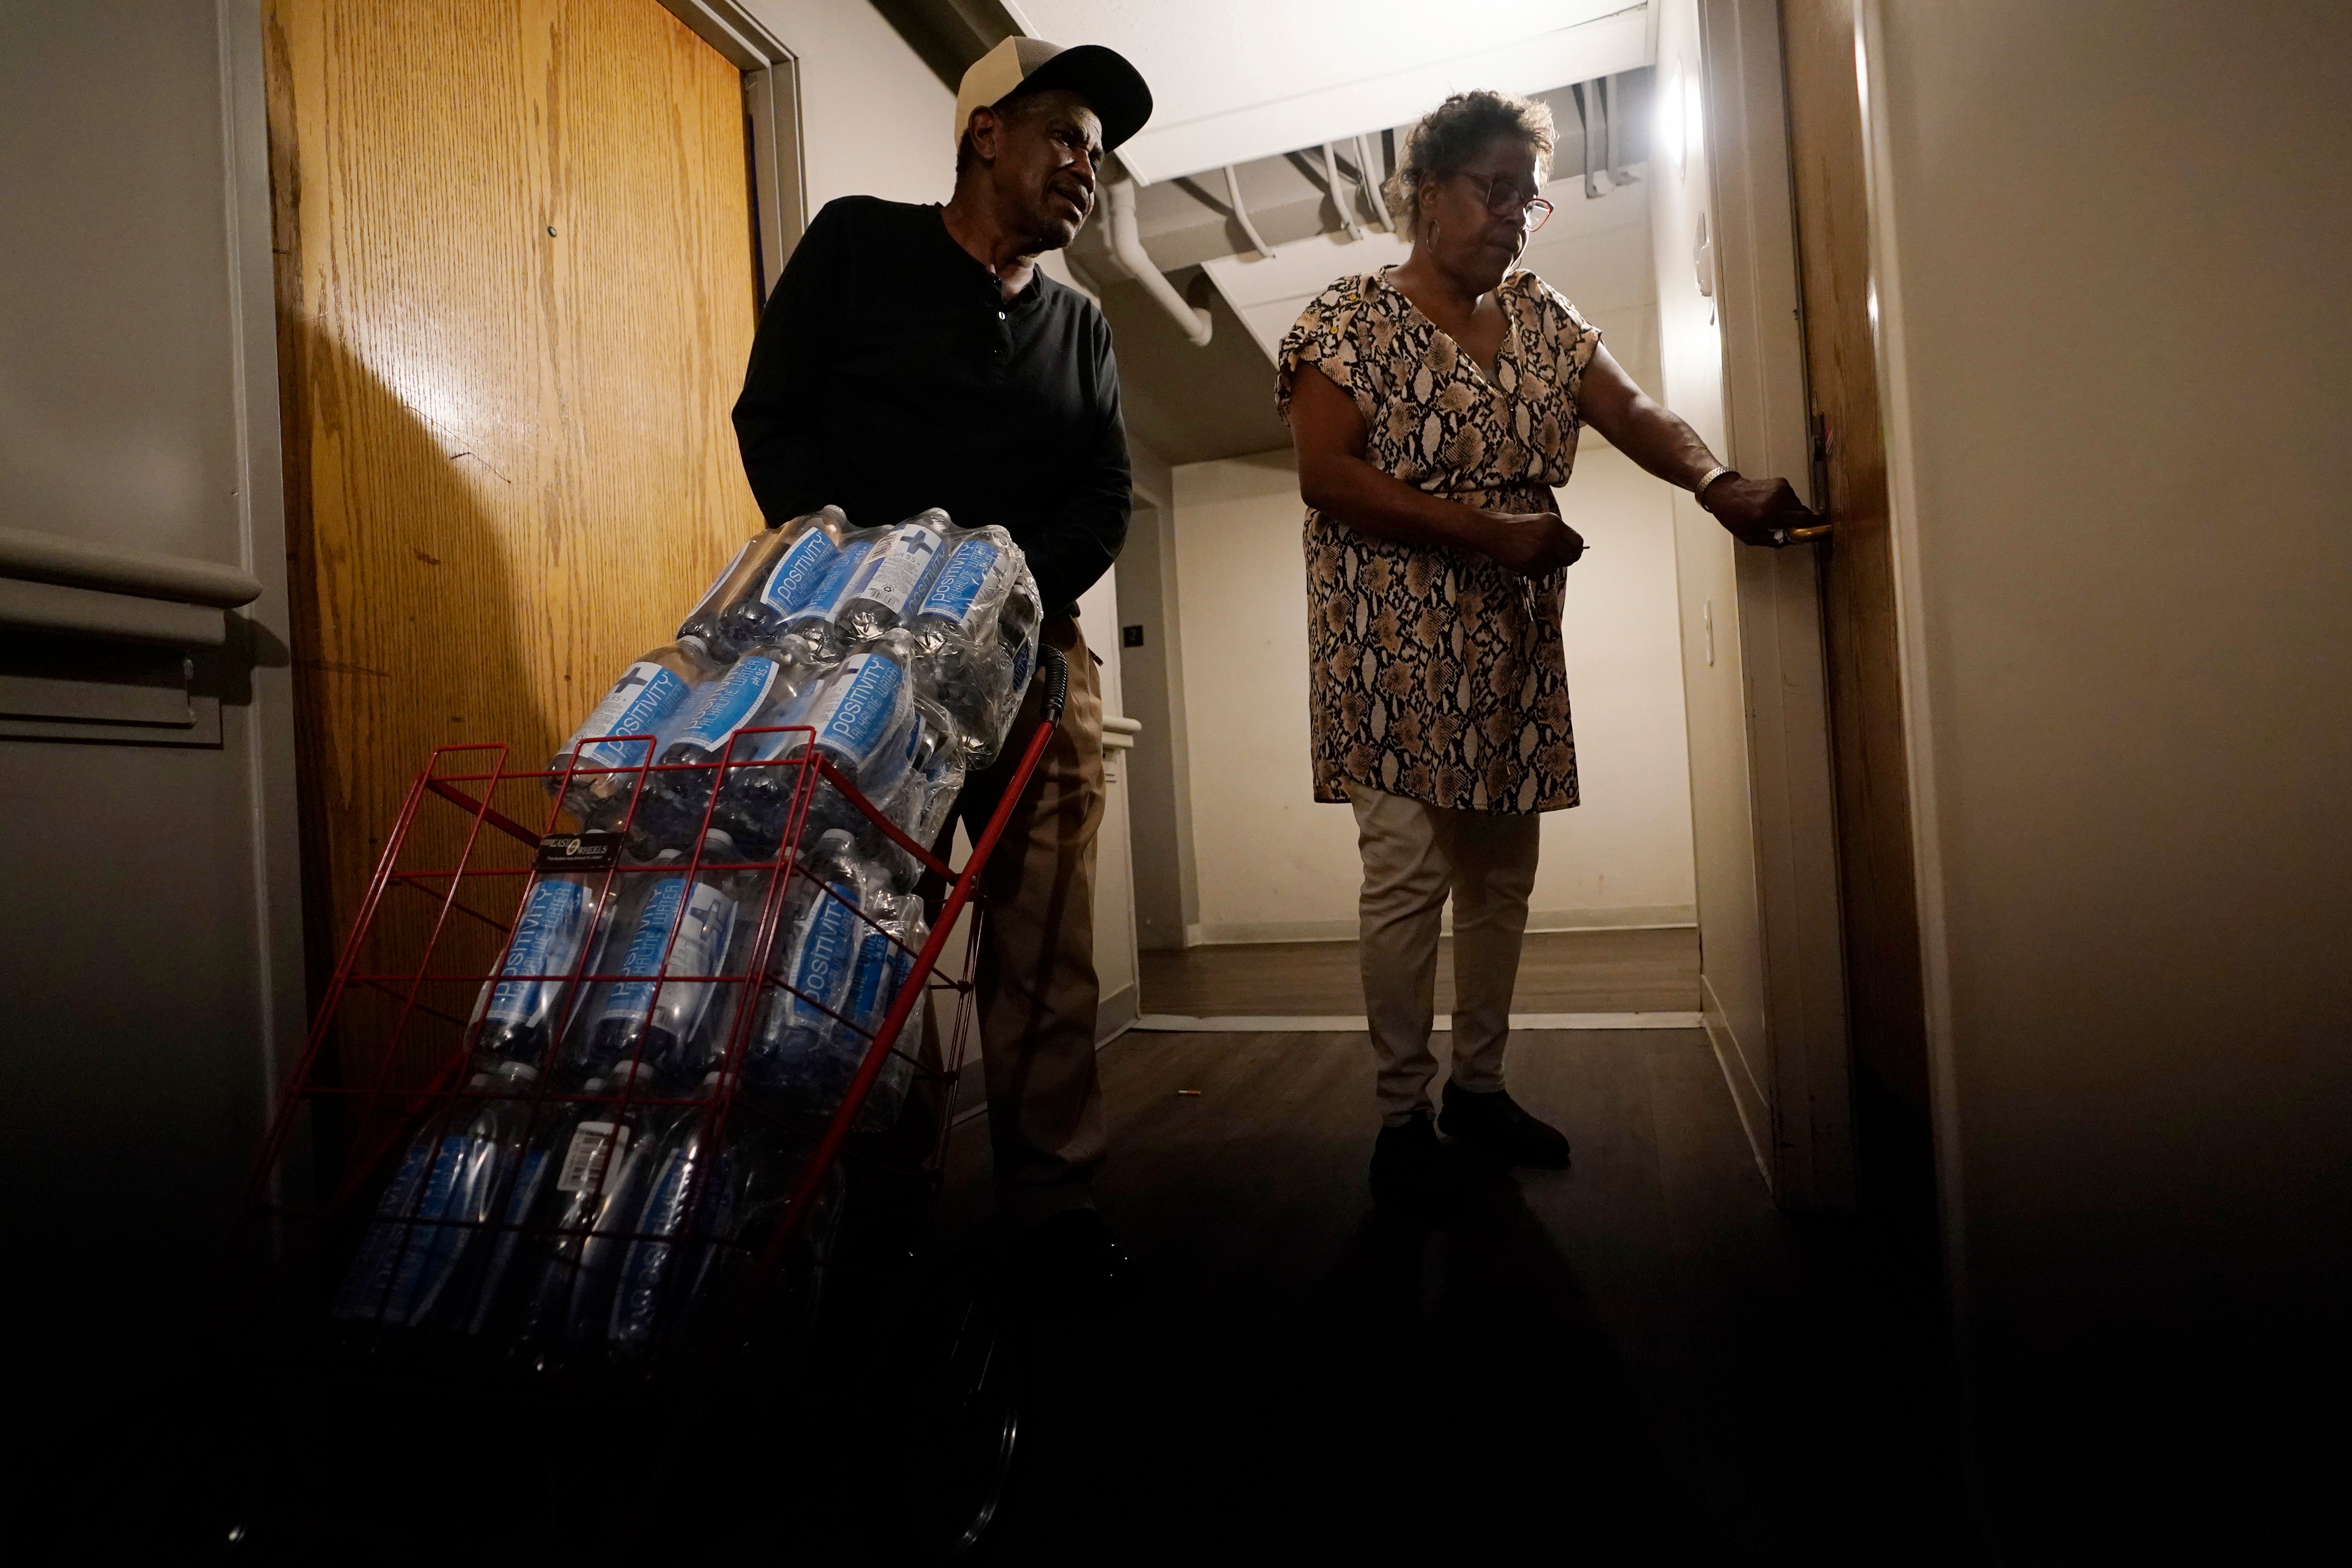 Mary Gaines, right, a resident of the Golden Keys Senior Living apartments, unlocks her door as a friend helps her with cases of fresh water in Jackson